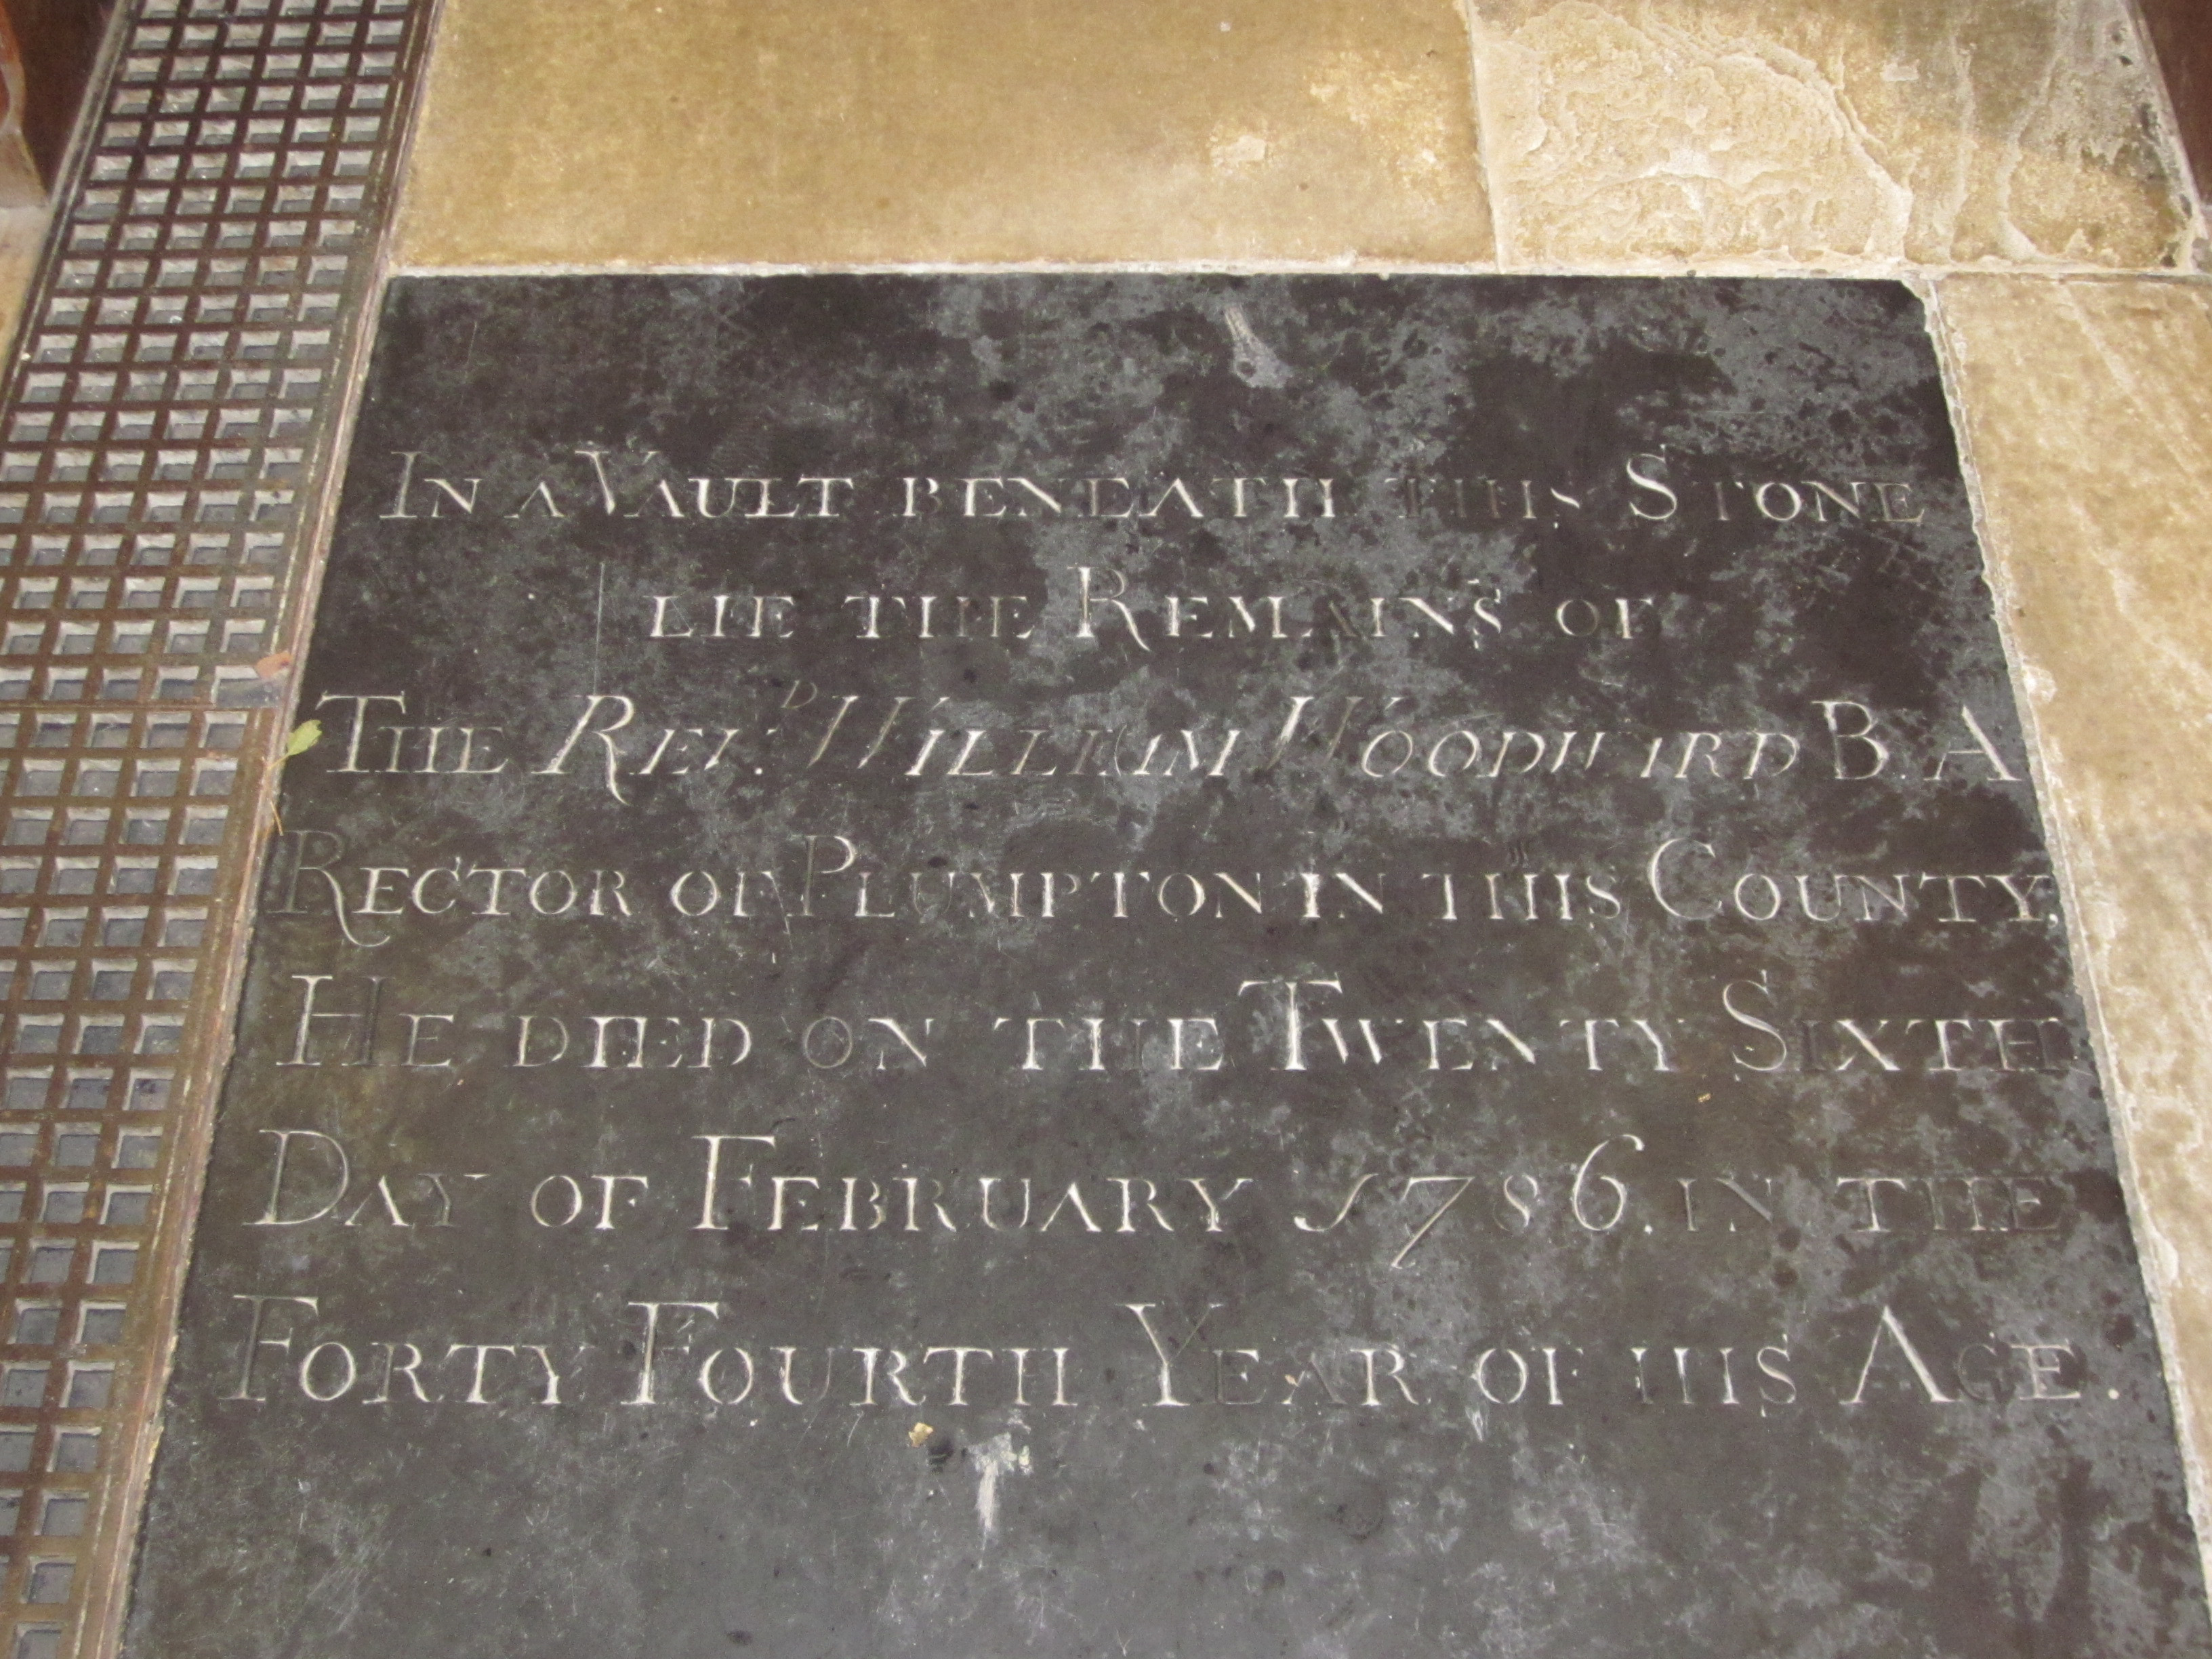 In a vault beneath this stone lie the Remains of The Rev William Woodward BA. Rector of Plumpton in this County. He died on the Twenty Sixth Day of February 1786 in the Forty Fourth Year of his Age.